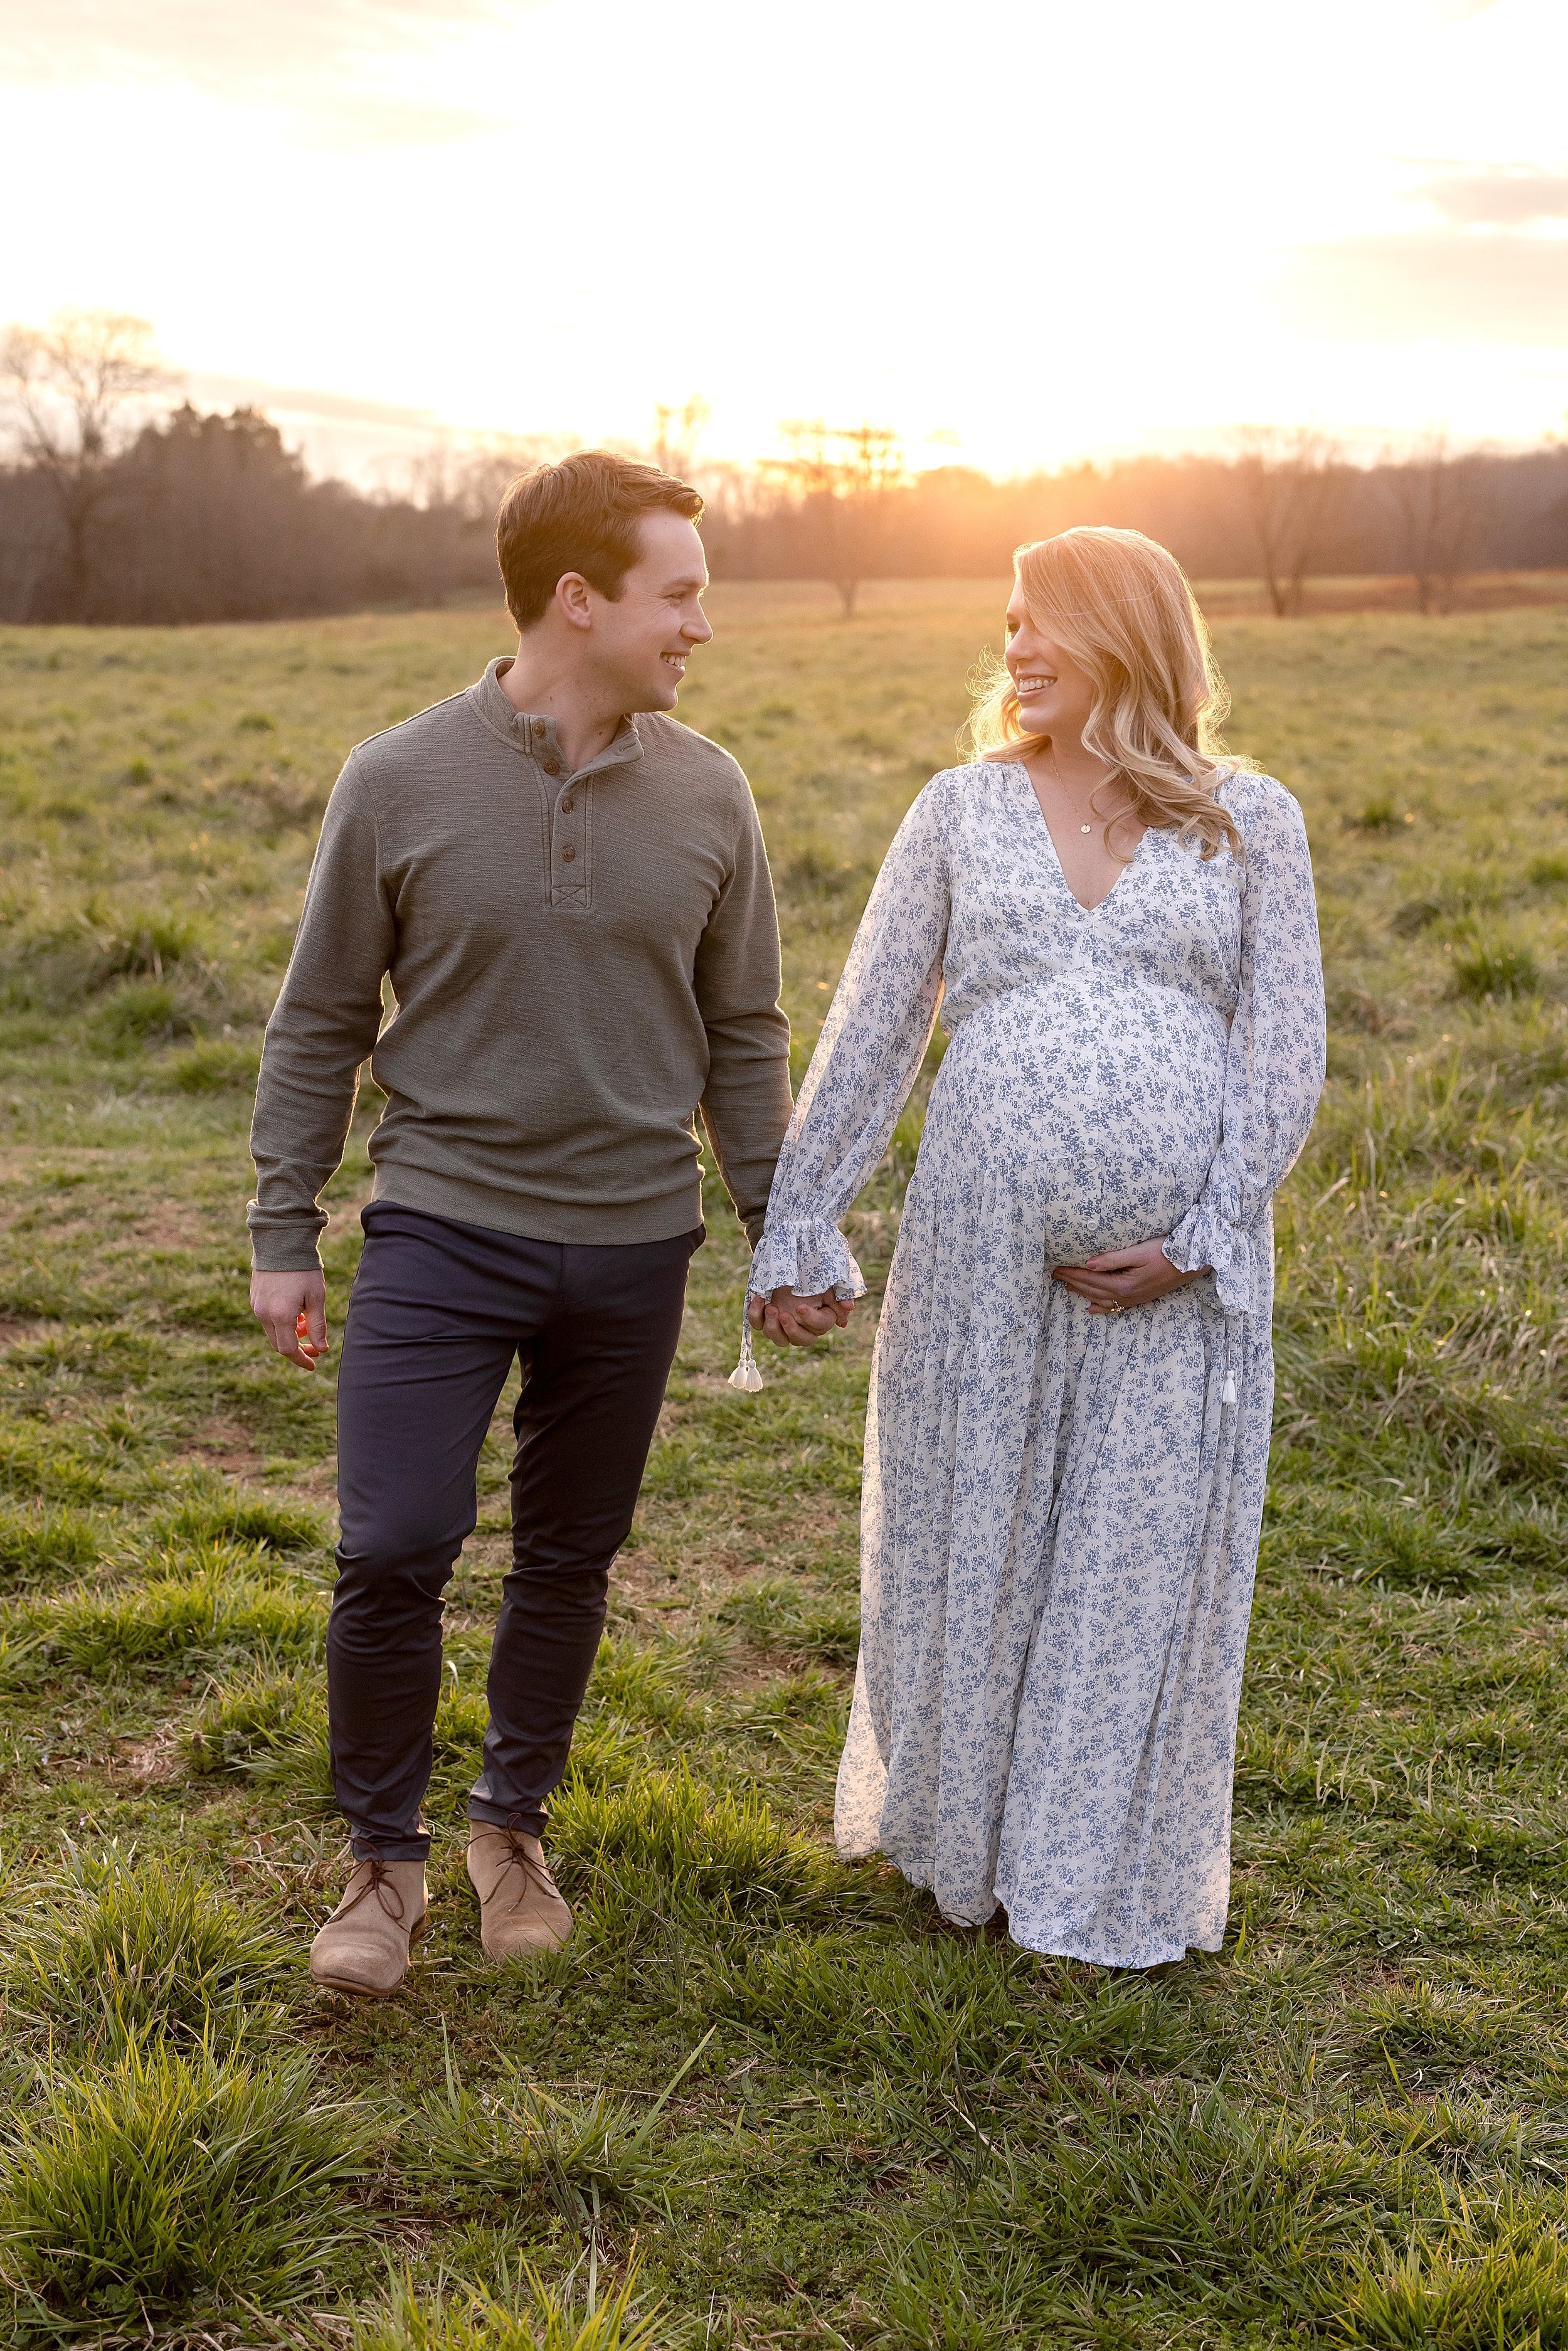  Maternity photo session in an Atlanta field of an expectant couple as they walk hand in hand and talk to one another taken at sunset. 